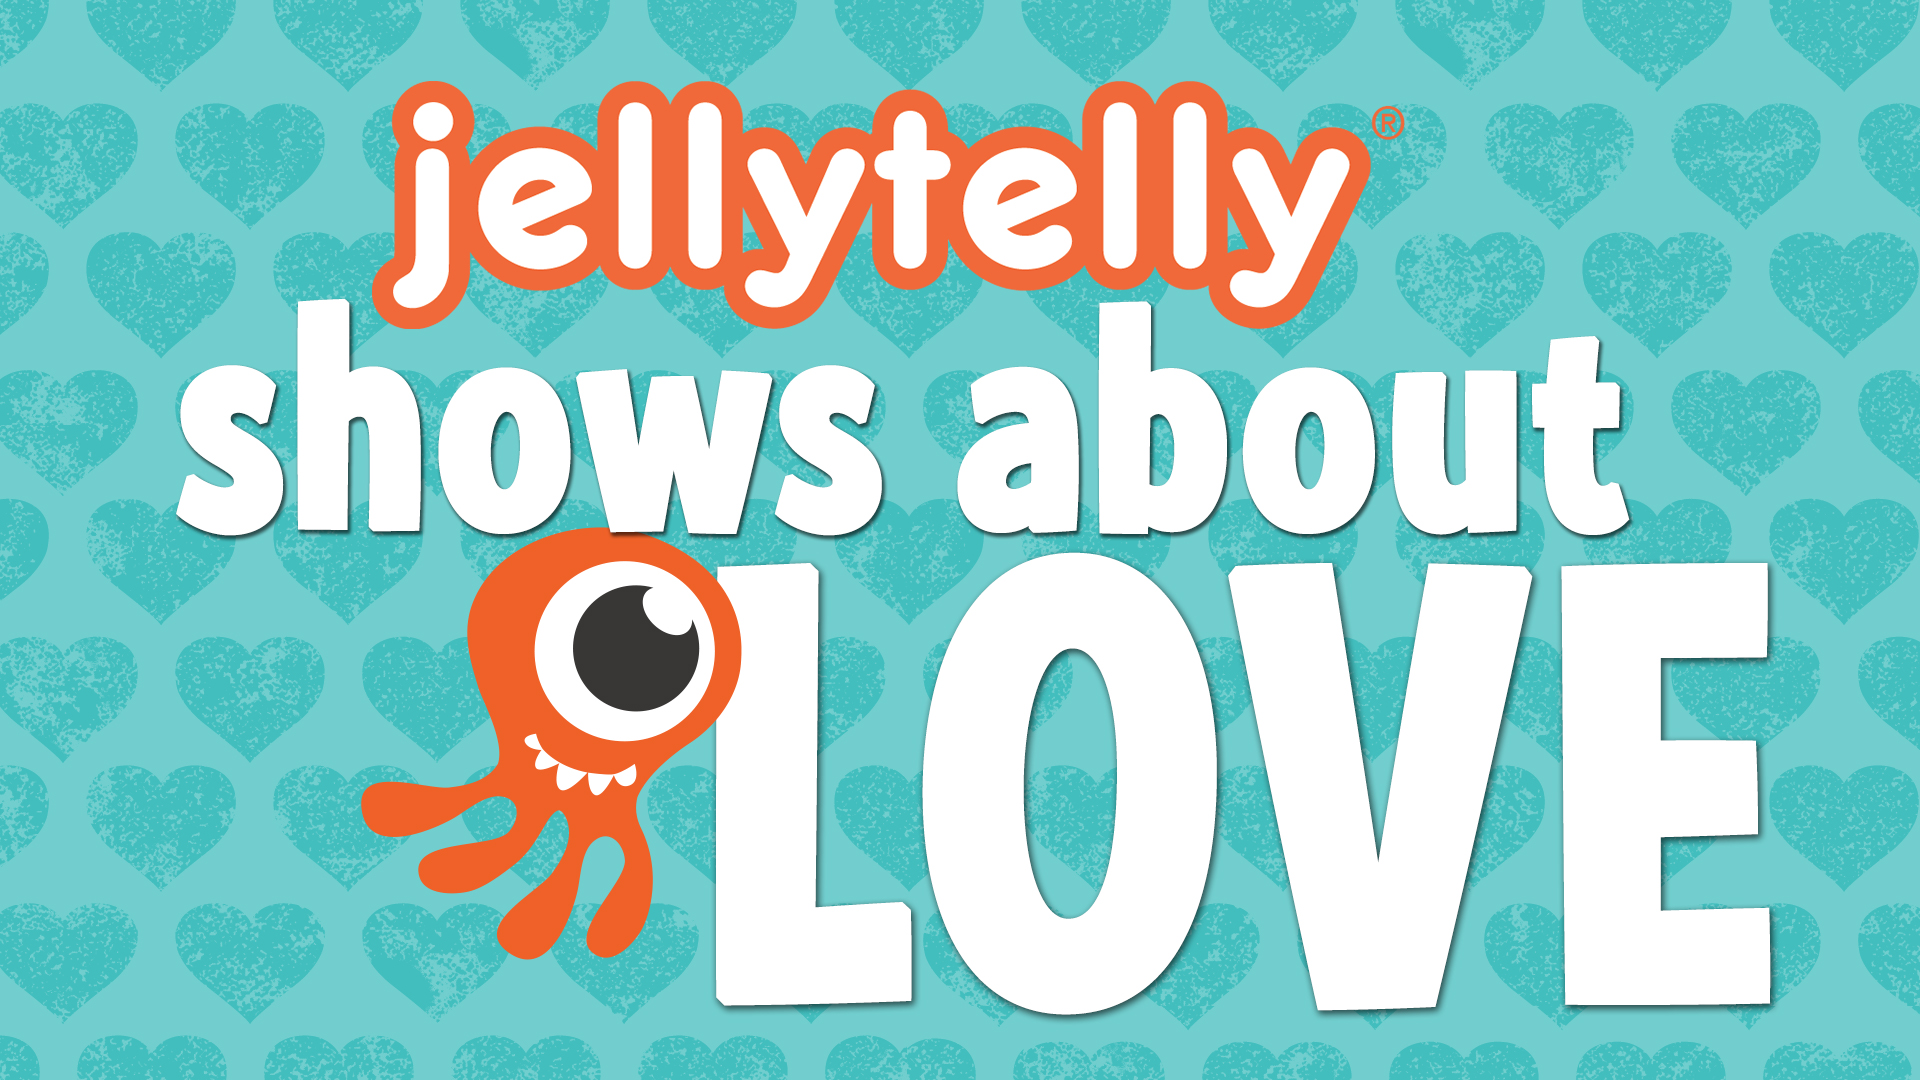 3 Bible Stories to Teach Your Kids about Love Jellytelly